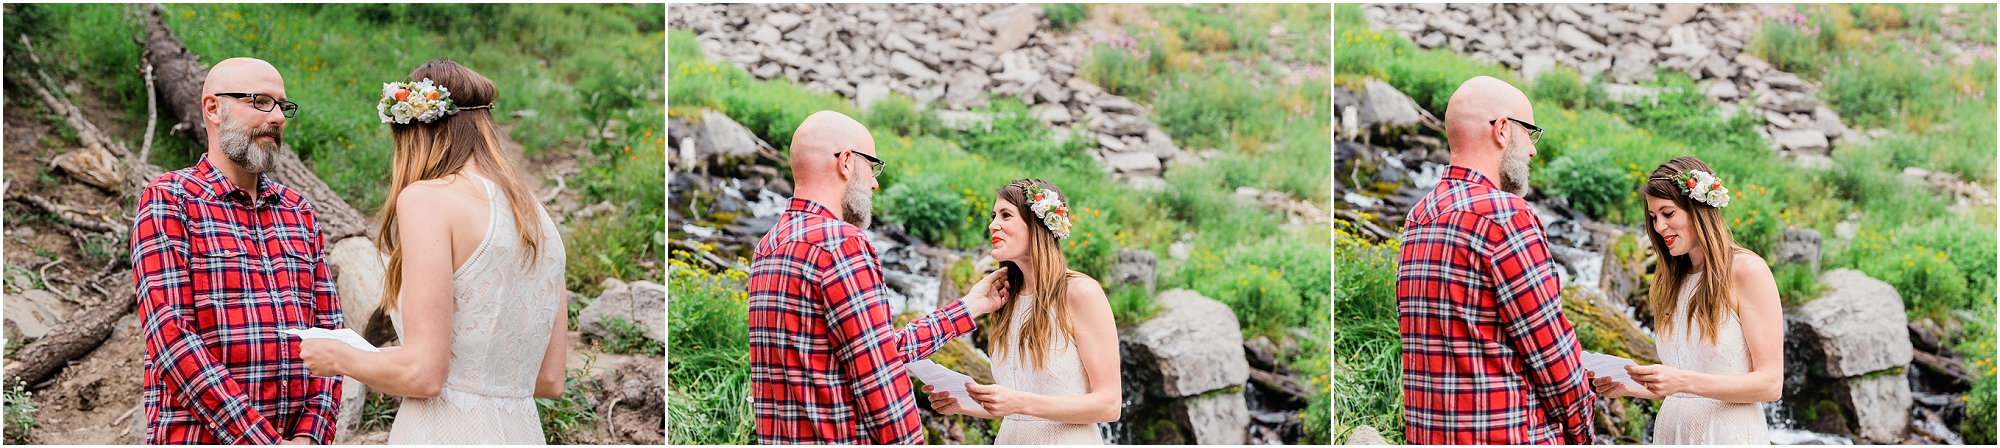 A loving groom wipes a tear from his bride's cheek as she recites her emotional vows at their Oregon elopement near Bend. | Erica Swantek Photography